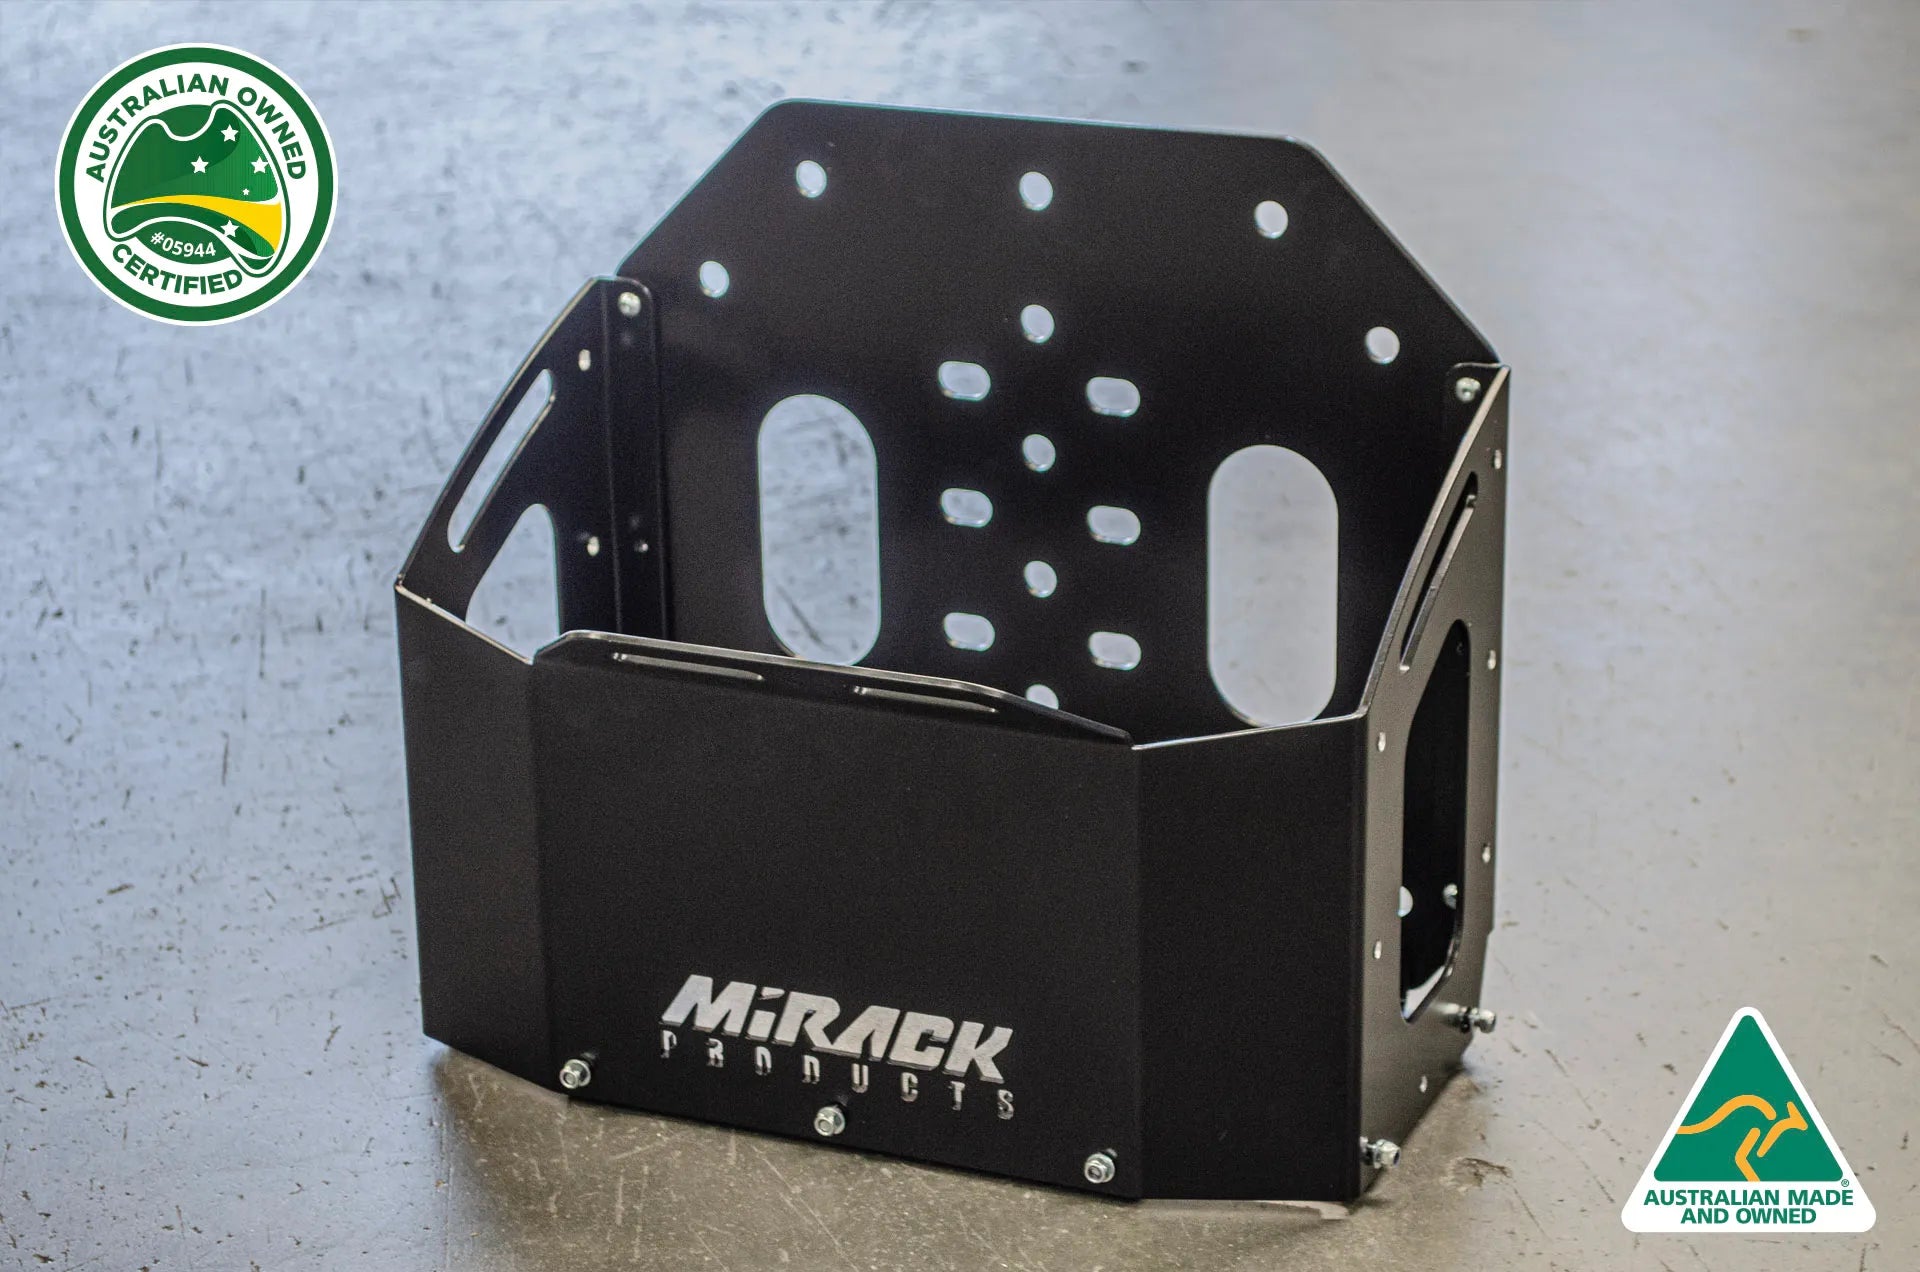 Mirack jerry can holder: Steel construction and laser-cut logo for enhanced off-road functionality and style.